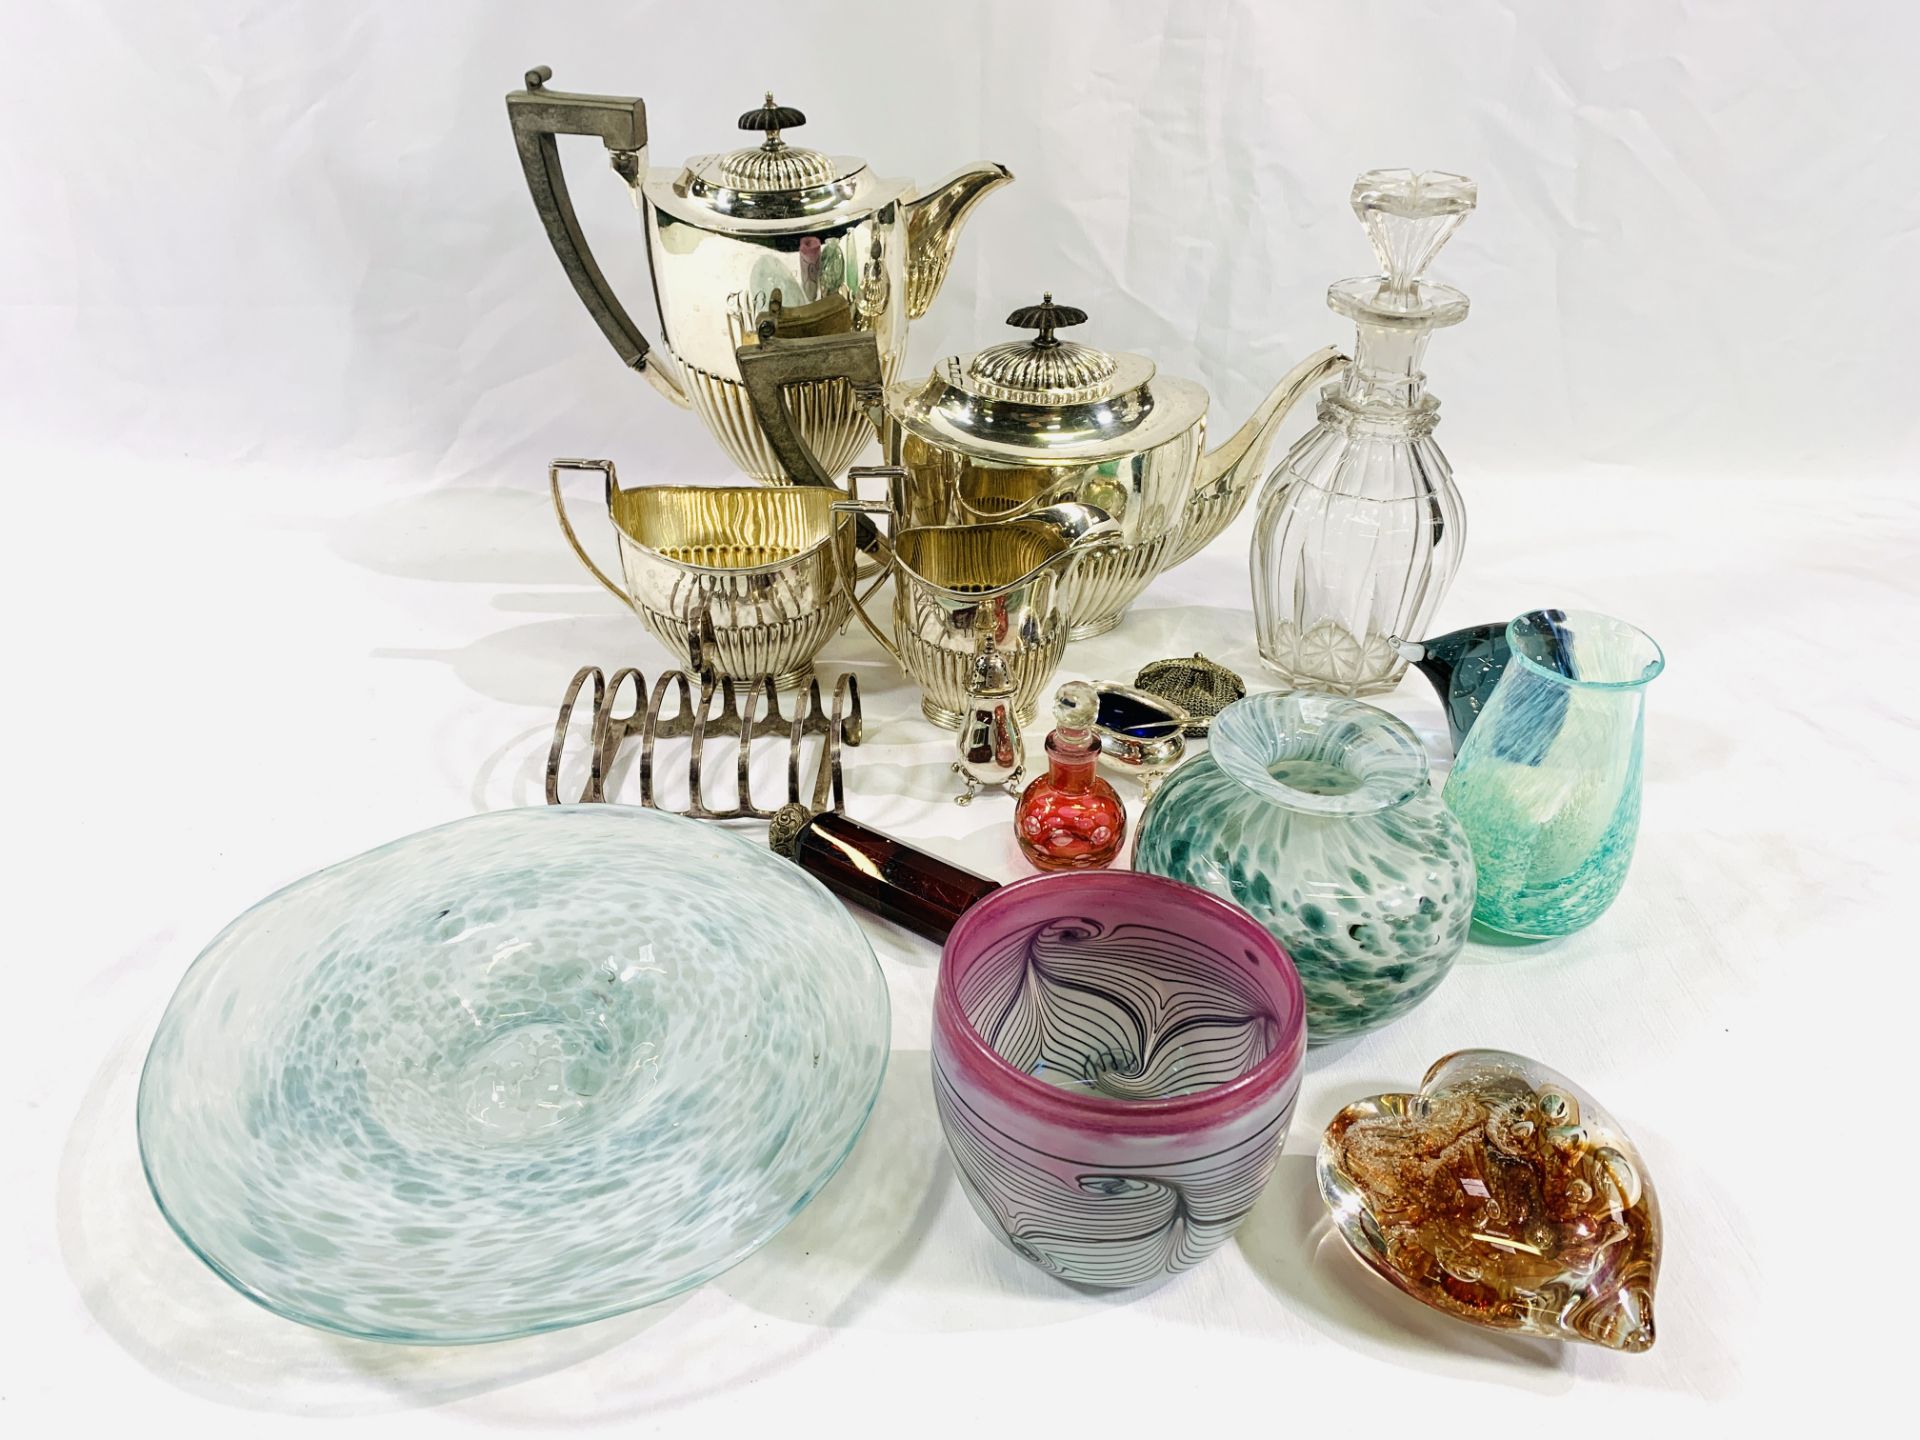 Silver plate tea set and other items